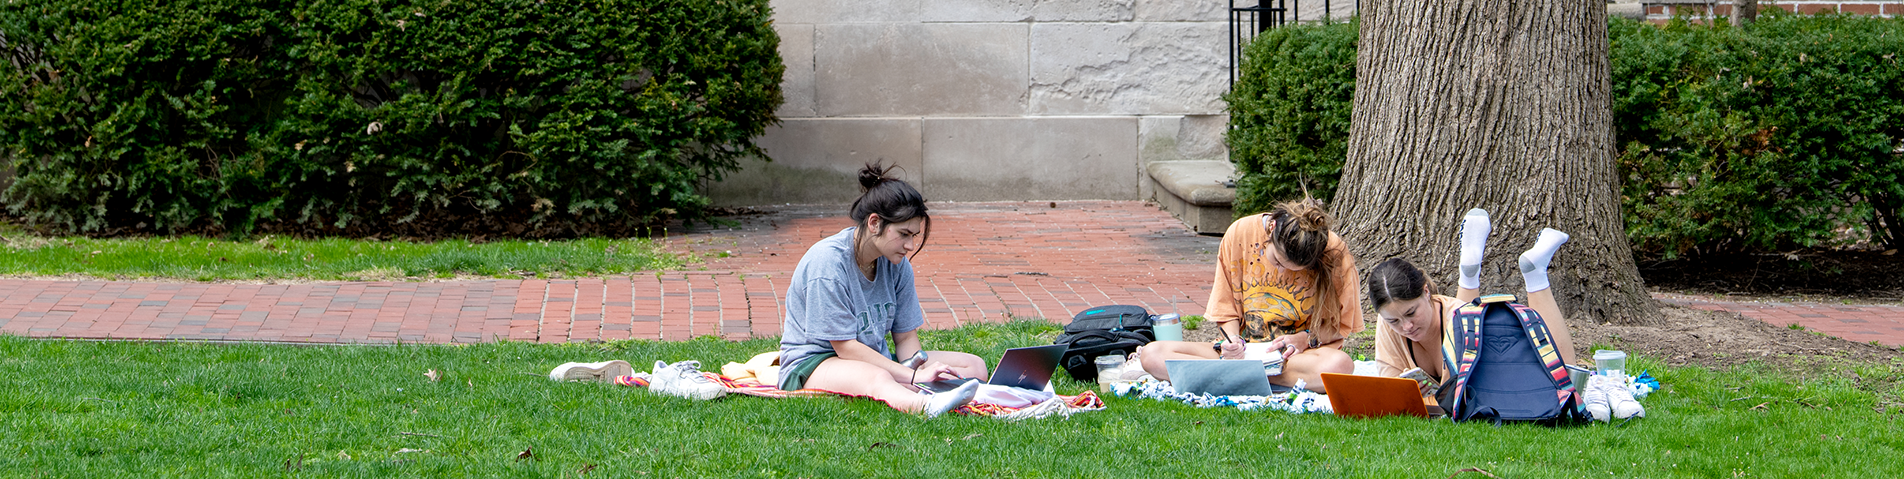 students sitting in a grass working on school assignments